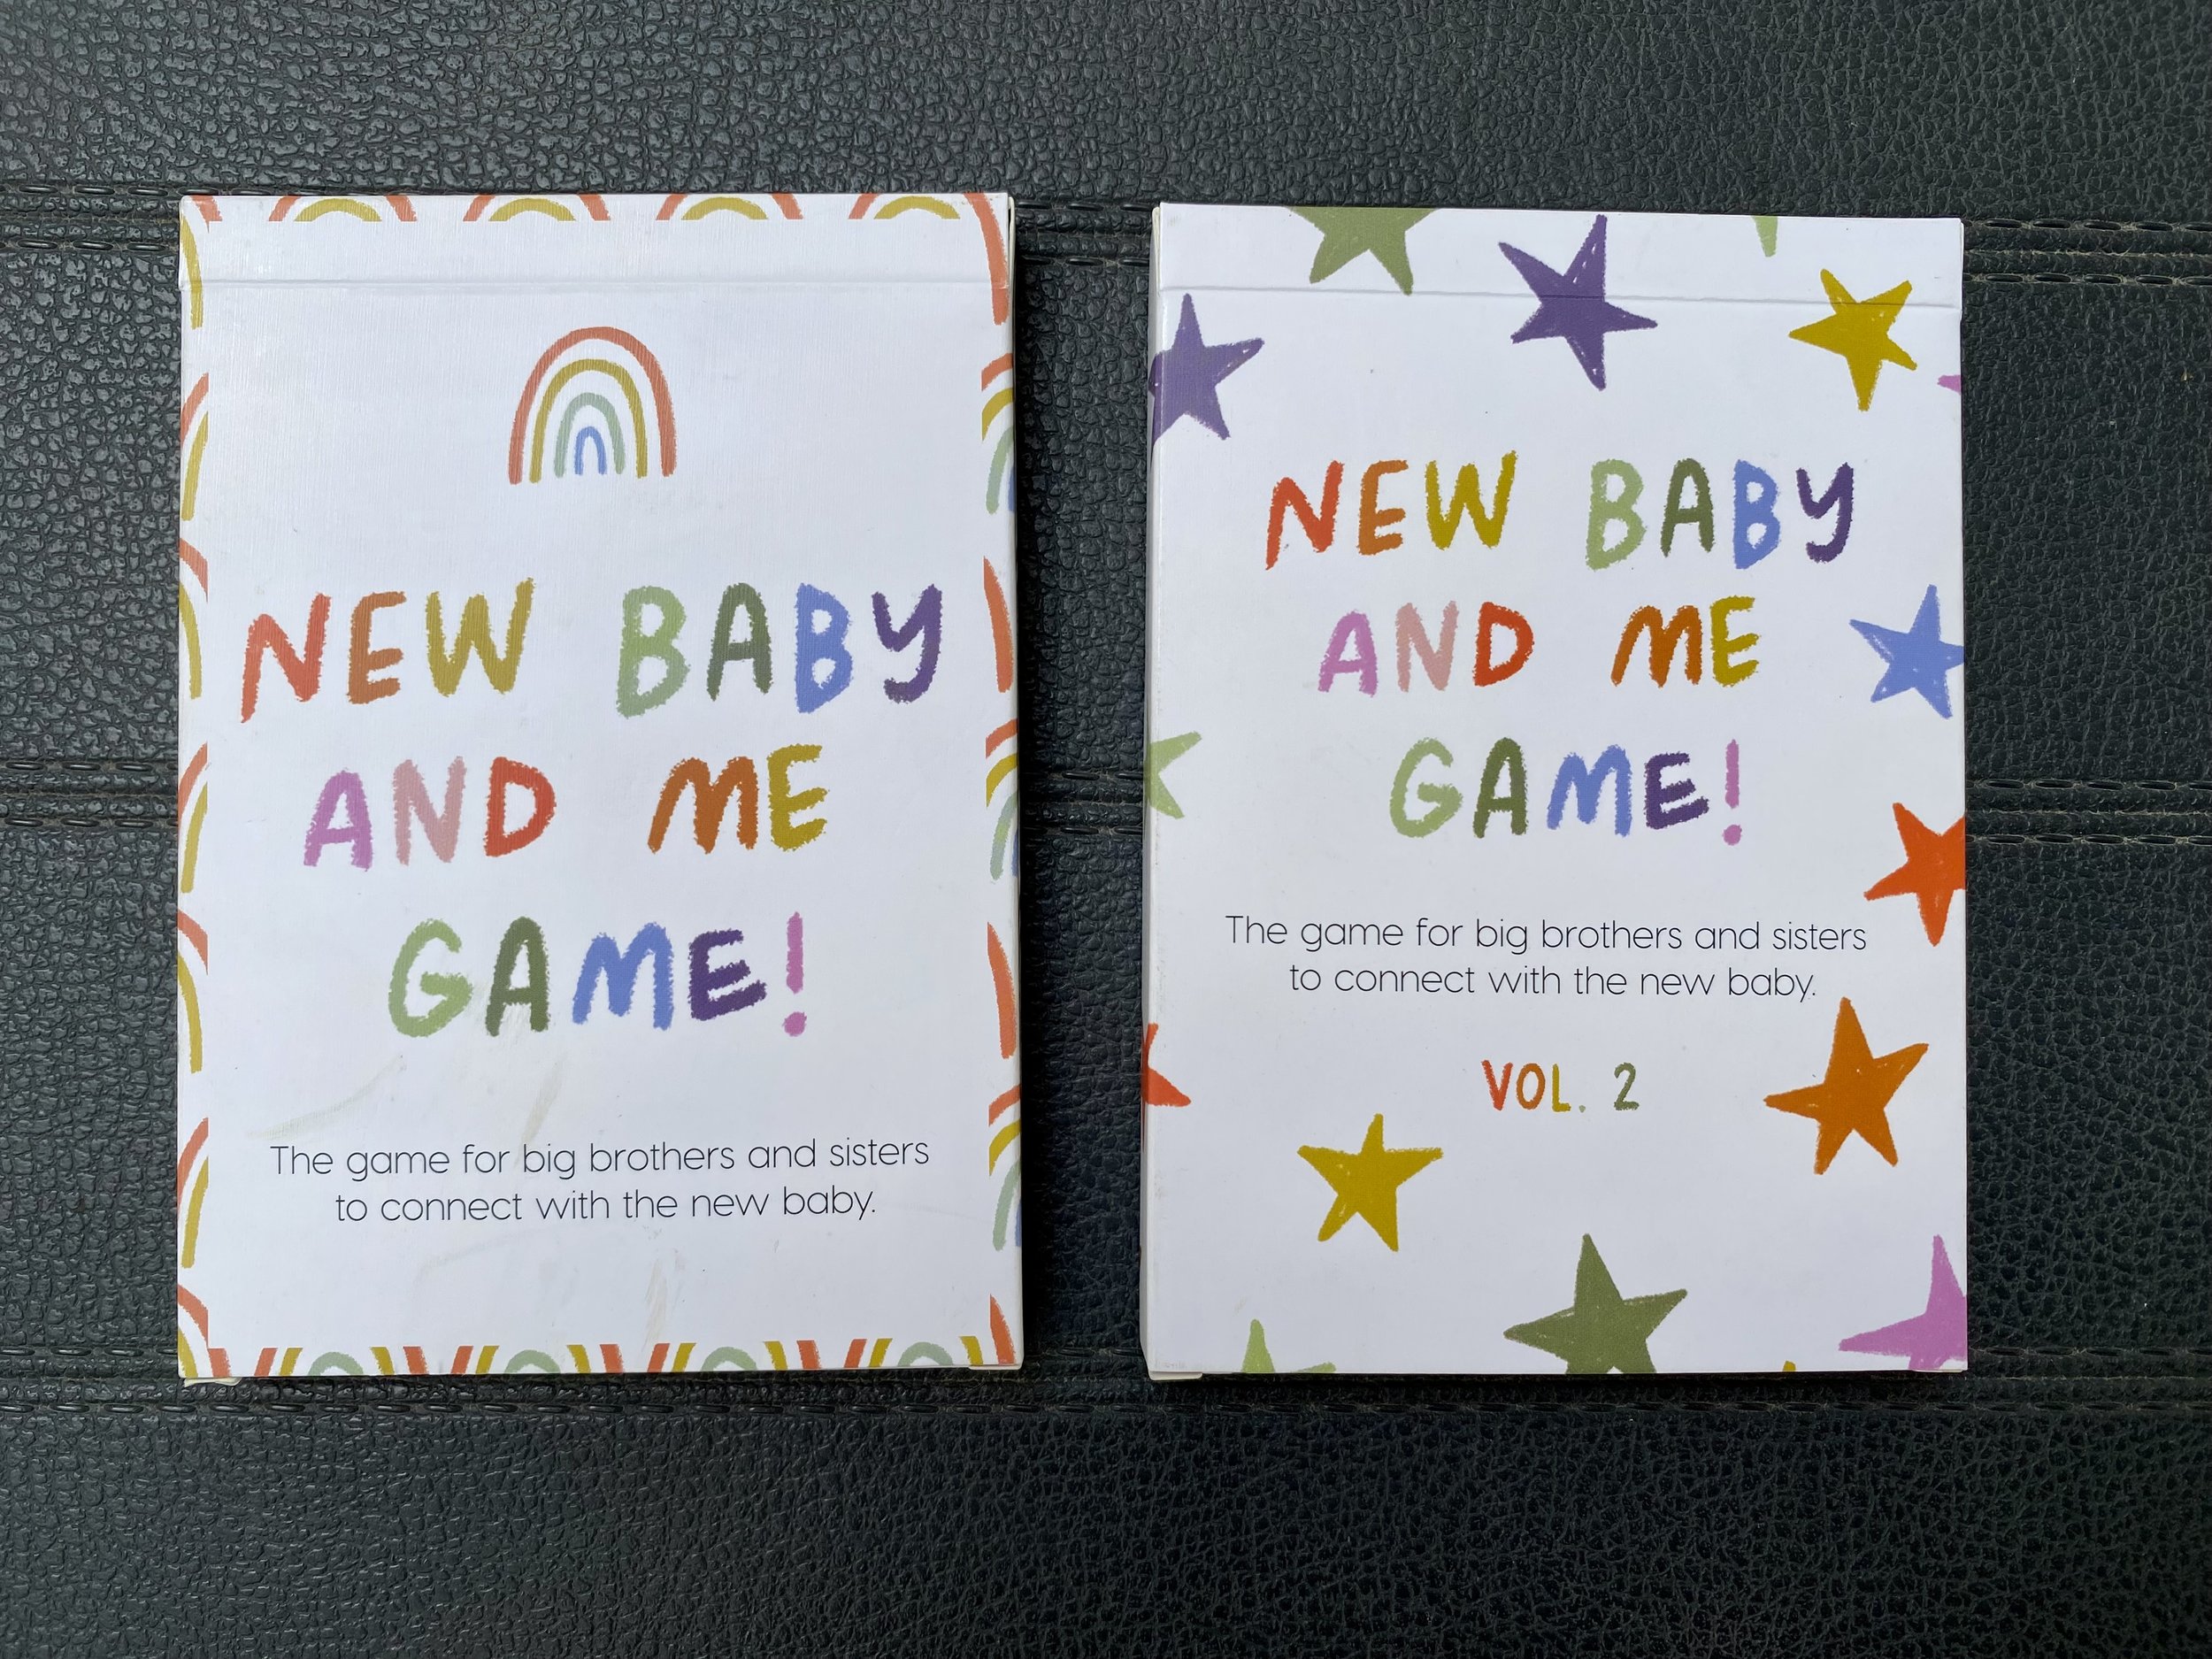 New Baby and Me Game